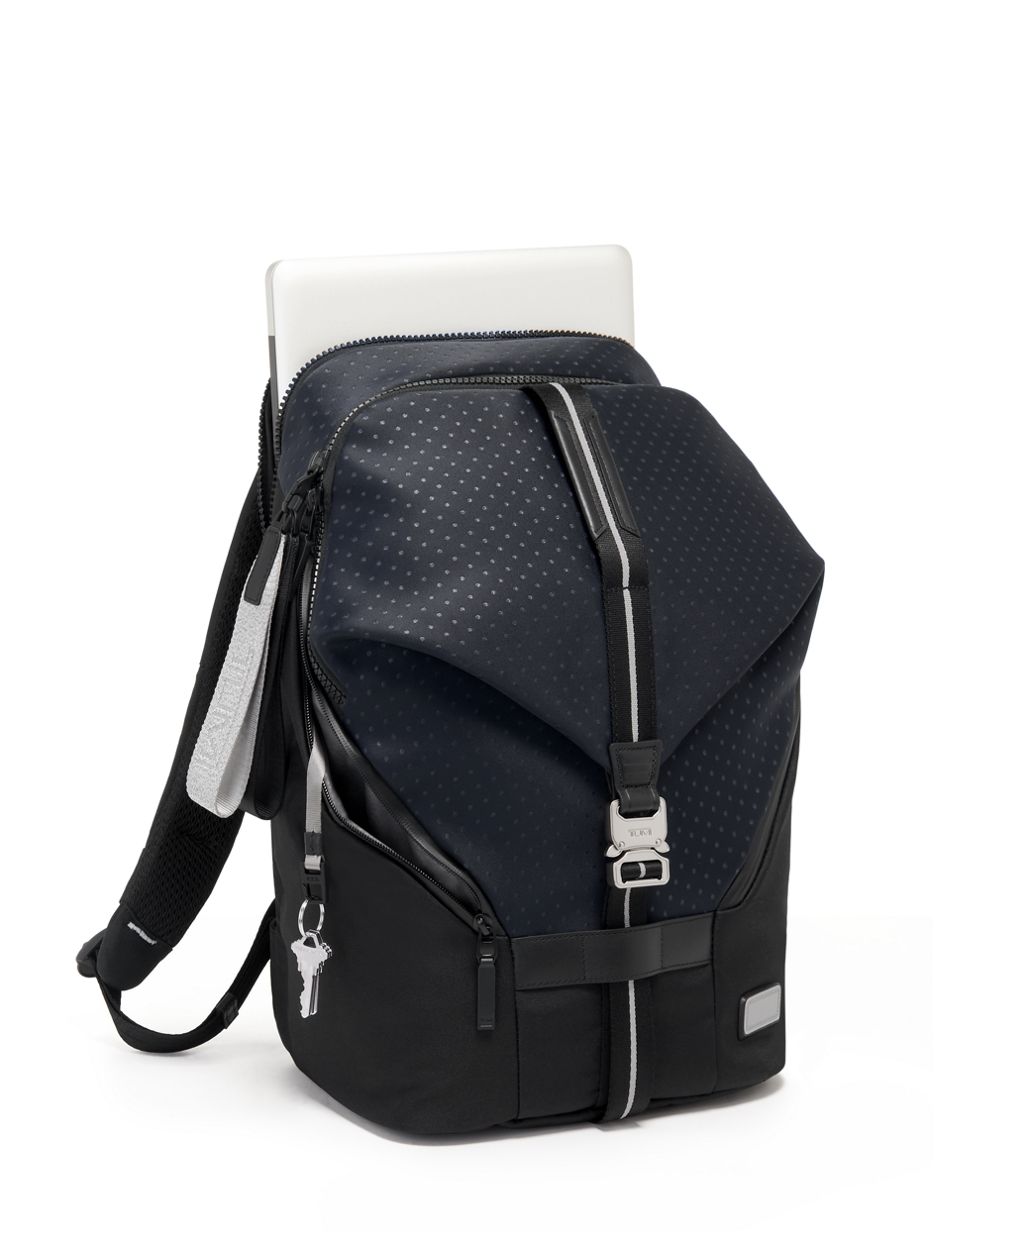 Finch Backpack